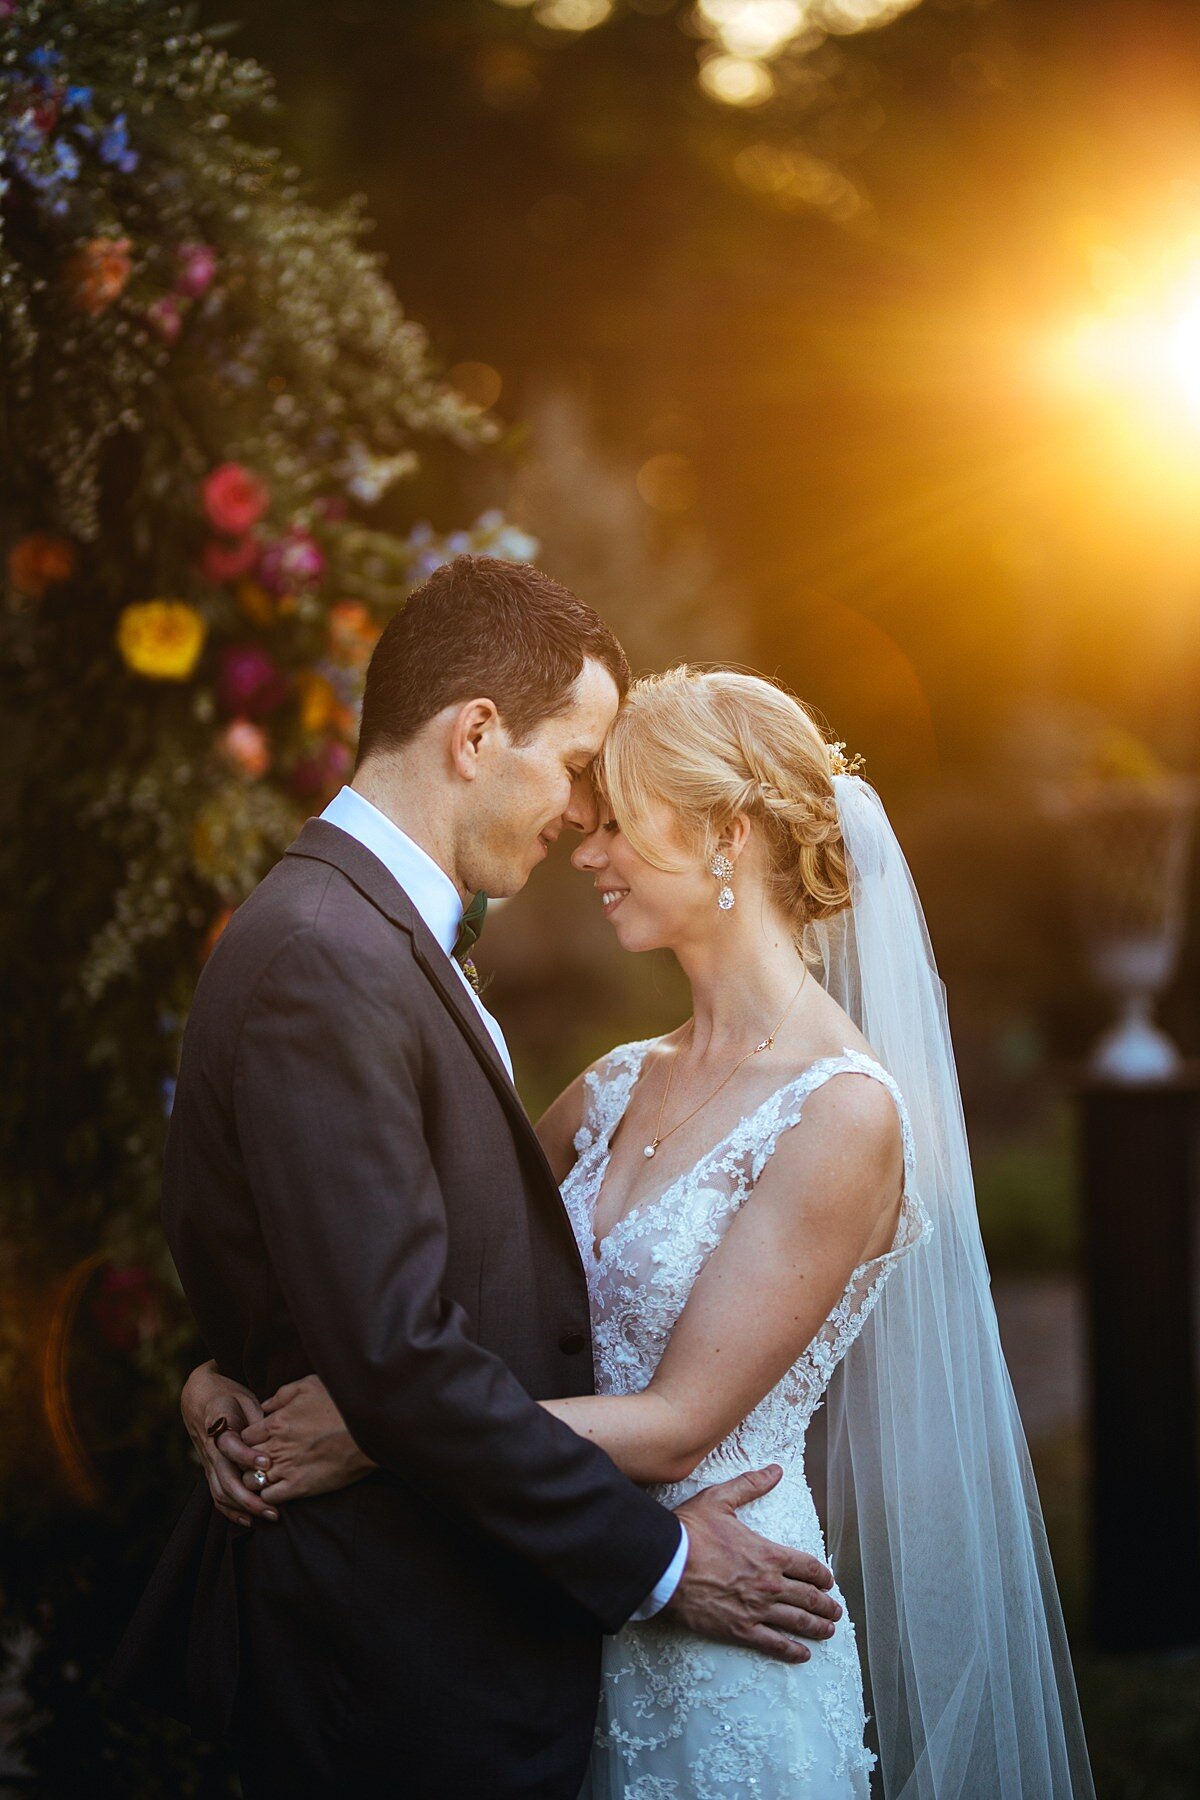 The bride, wearing a sleeveless lace wedding gown with a v-neckline and a long veil touching forheads with the groom wearing a charcoal gray suit as they embrace during golden hour as the sun sets at Cheekwood Botanical Garden